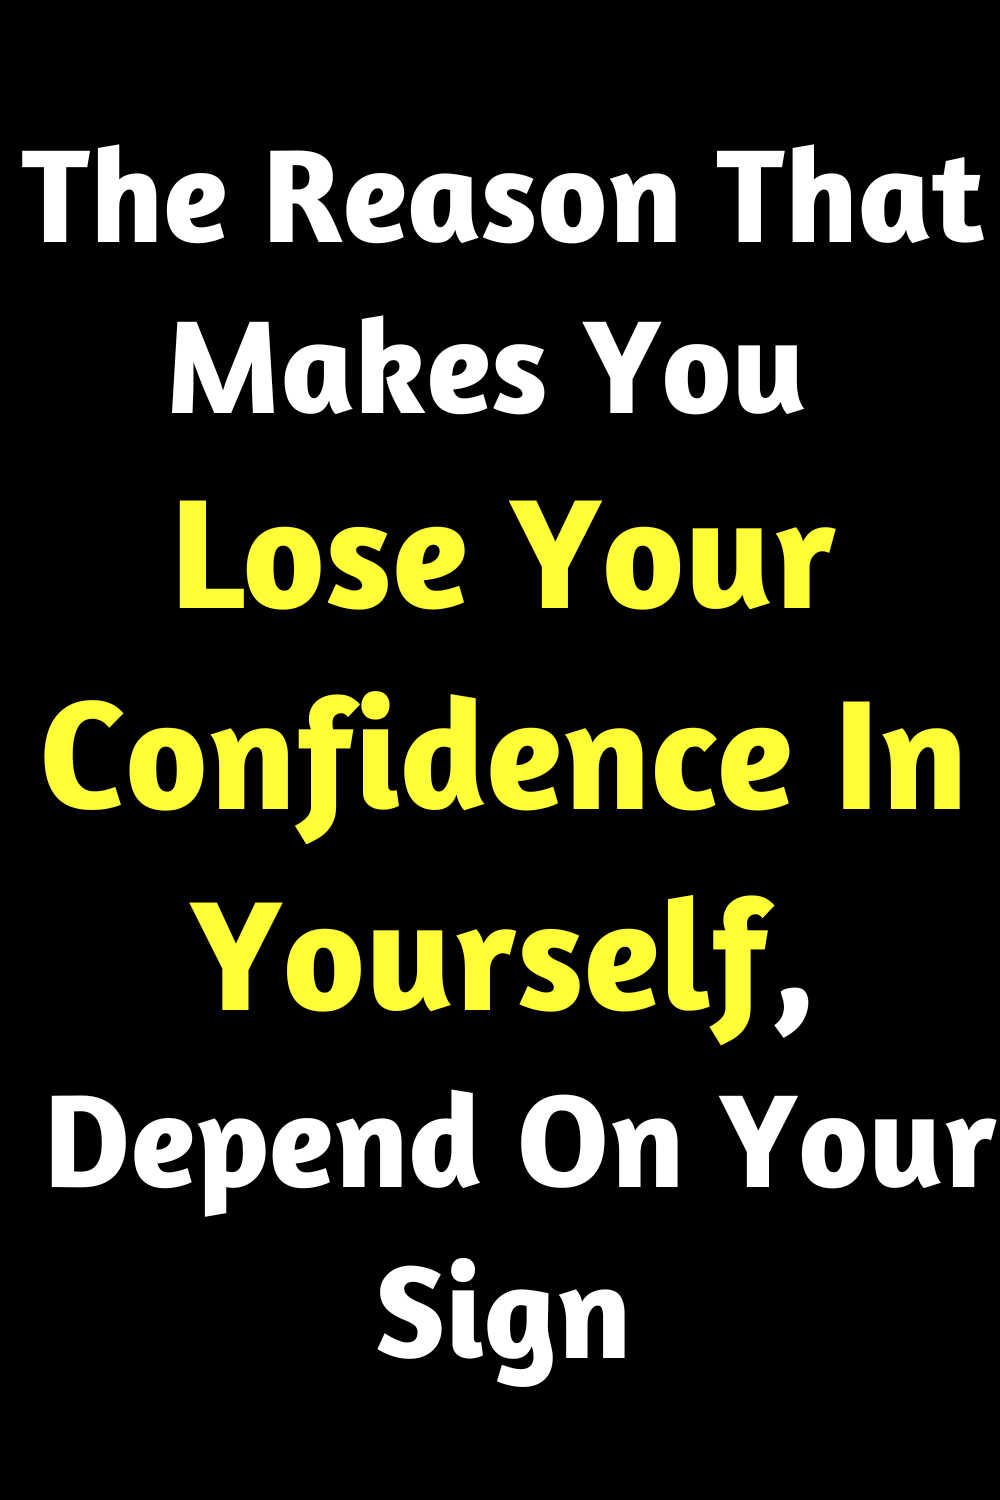 The Reason That Makes You Lose Your Confidence In Yourself, Depend On Your Sign